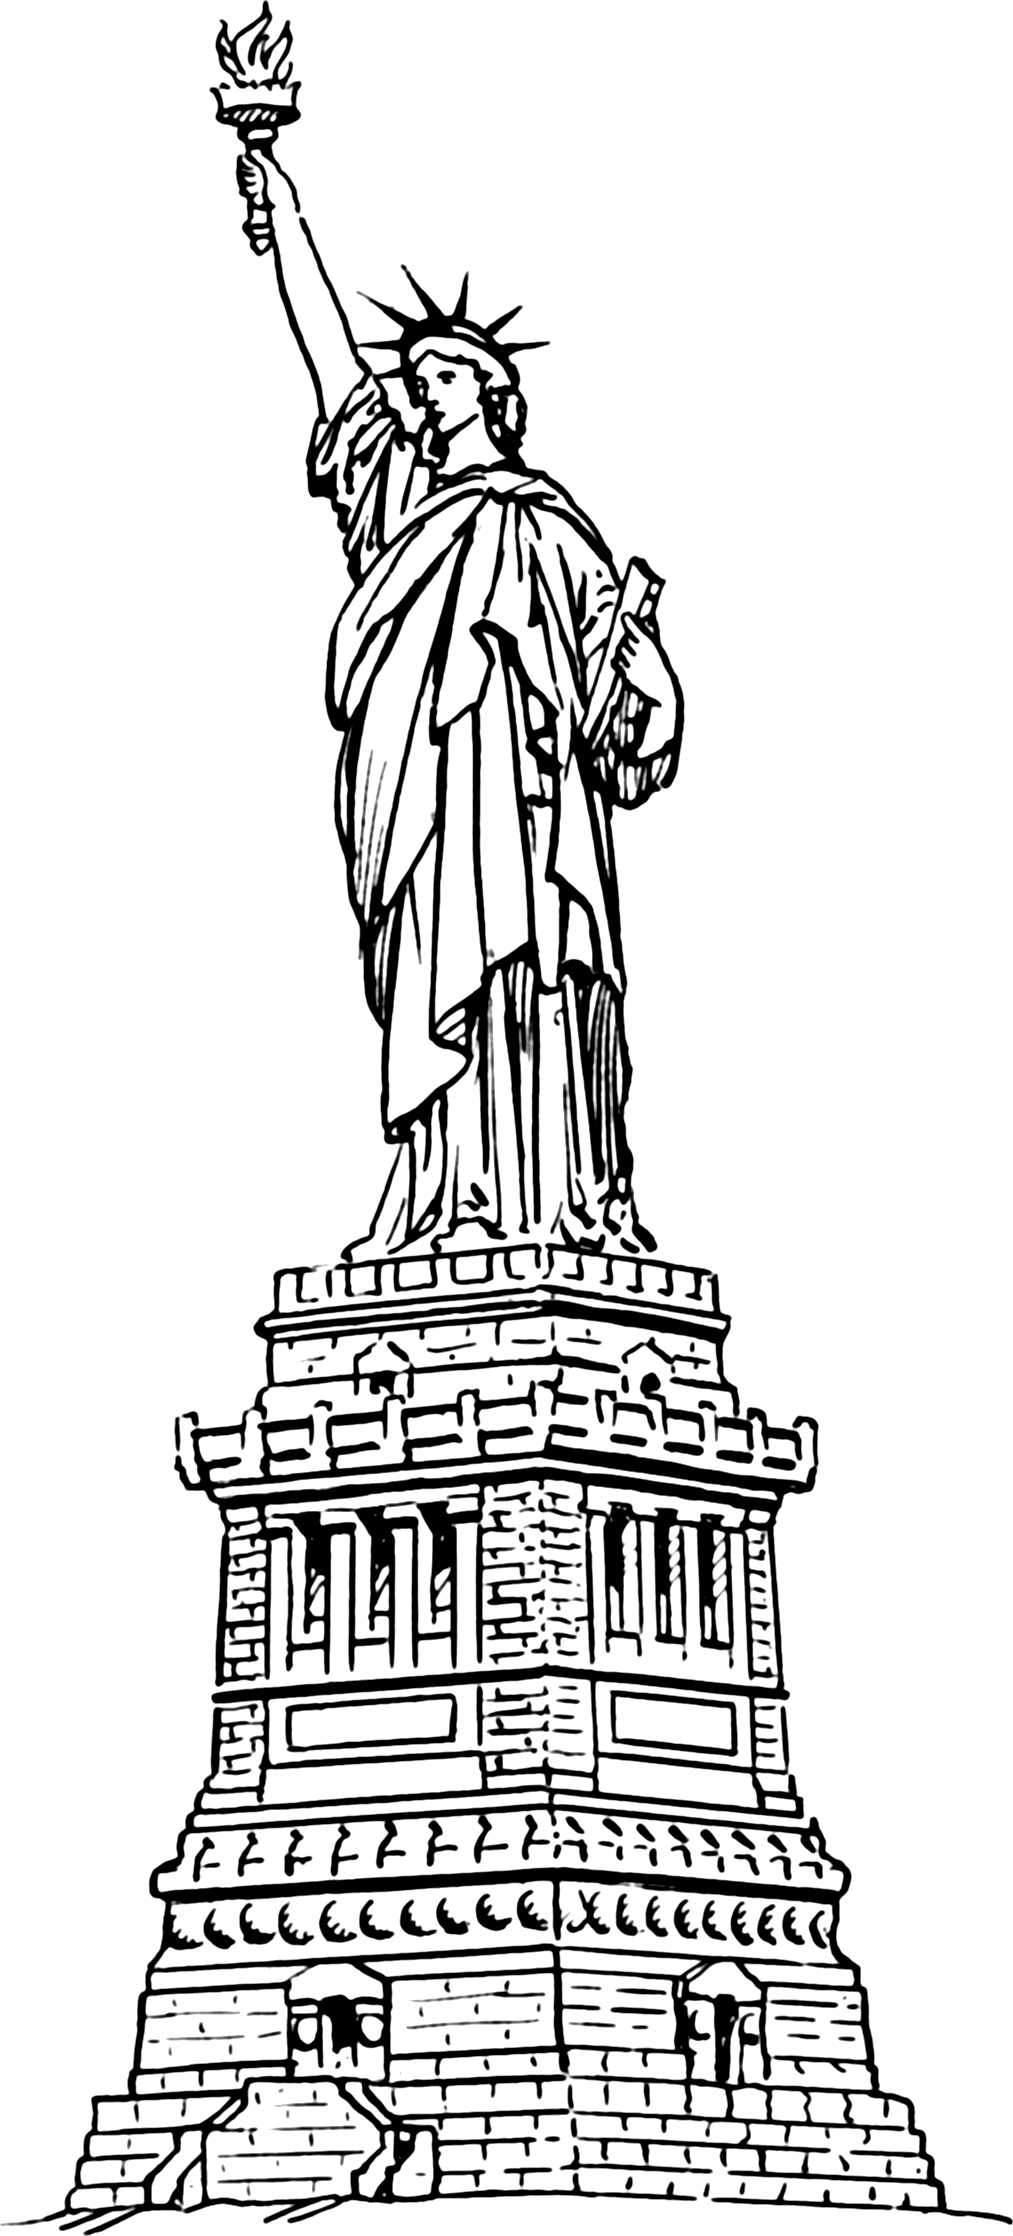 File:Statue of Liberty (PSF).